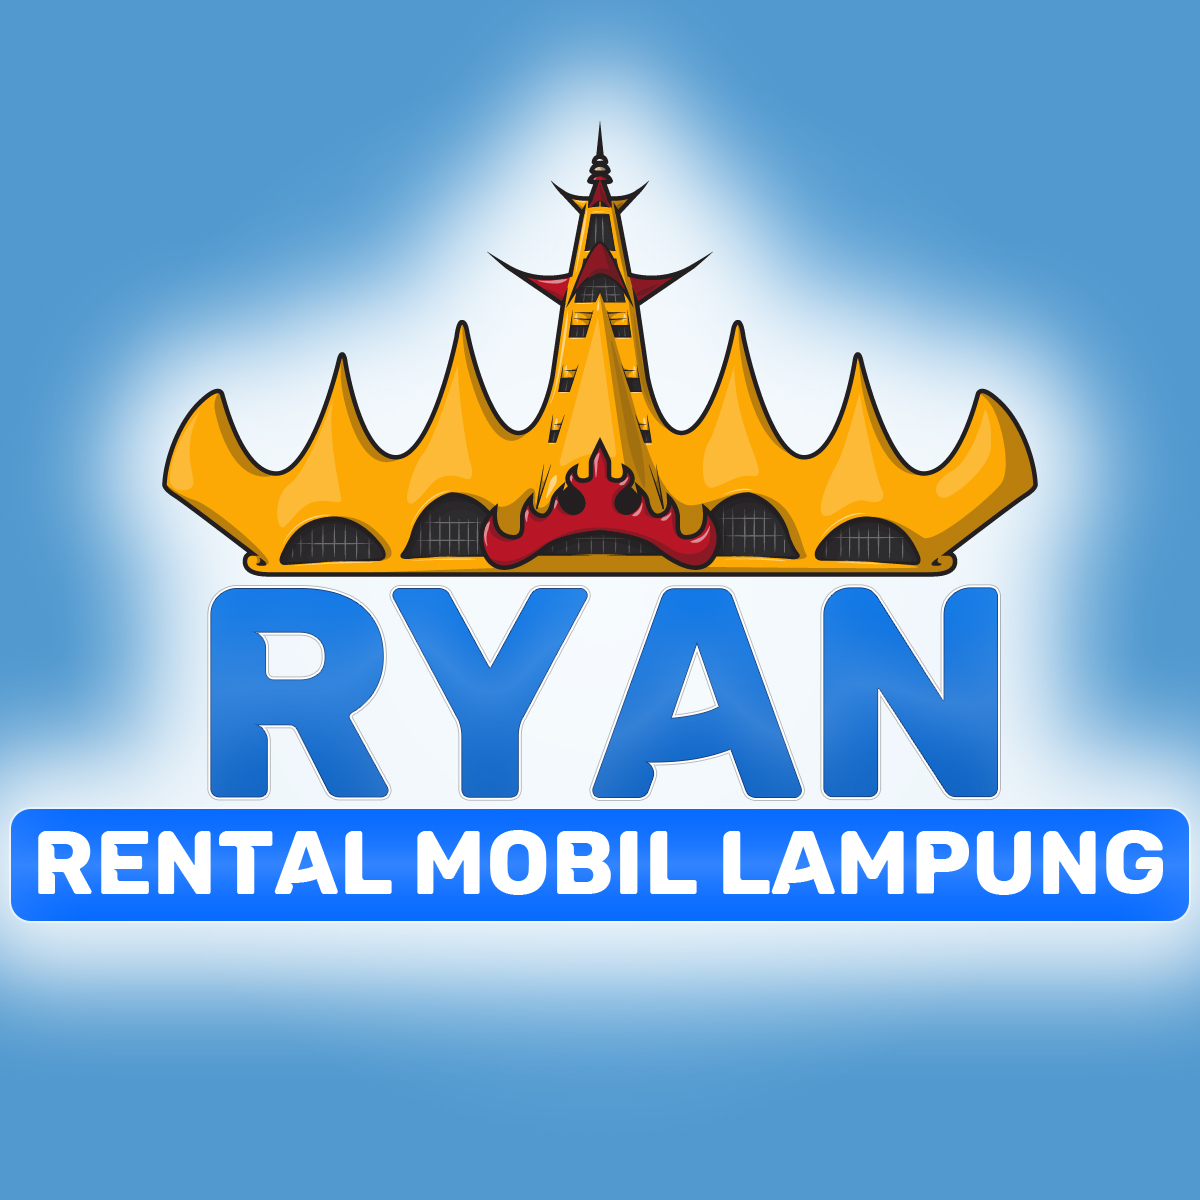 RYAN Rental Mobil Lampung Providing Unmatched Car Rental Services for Over 7 Years Service Areas in Lampung, Jakarta and Palembang